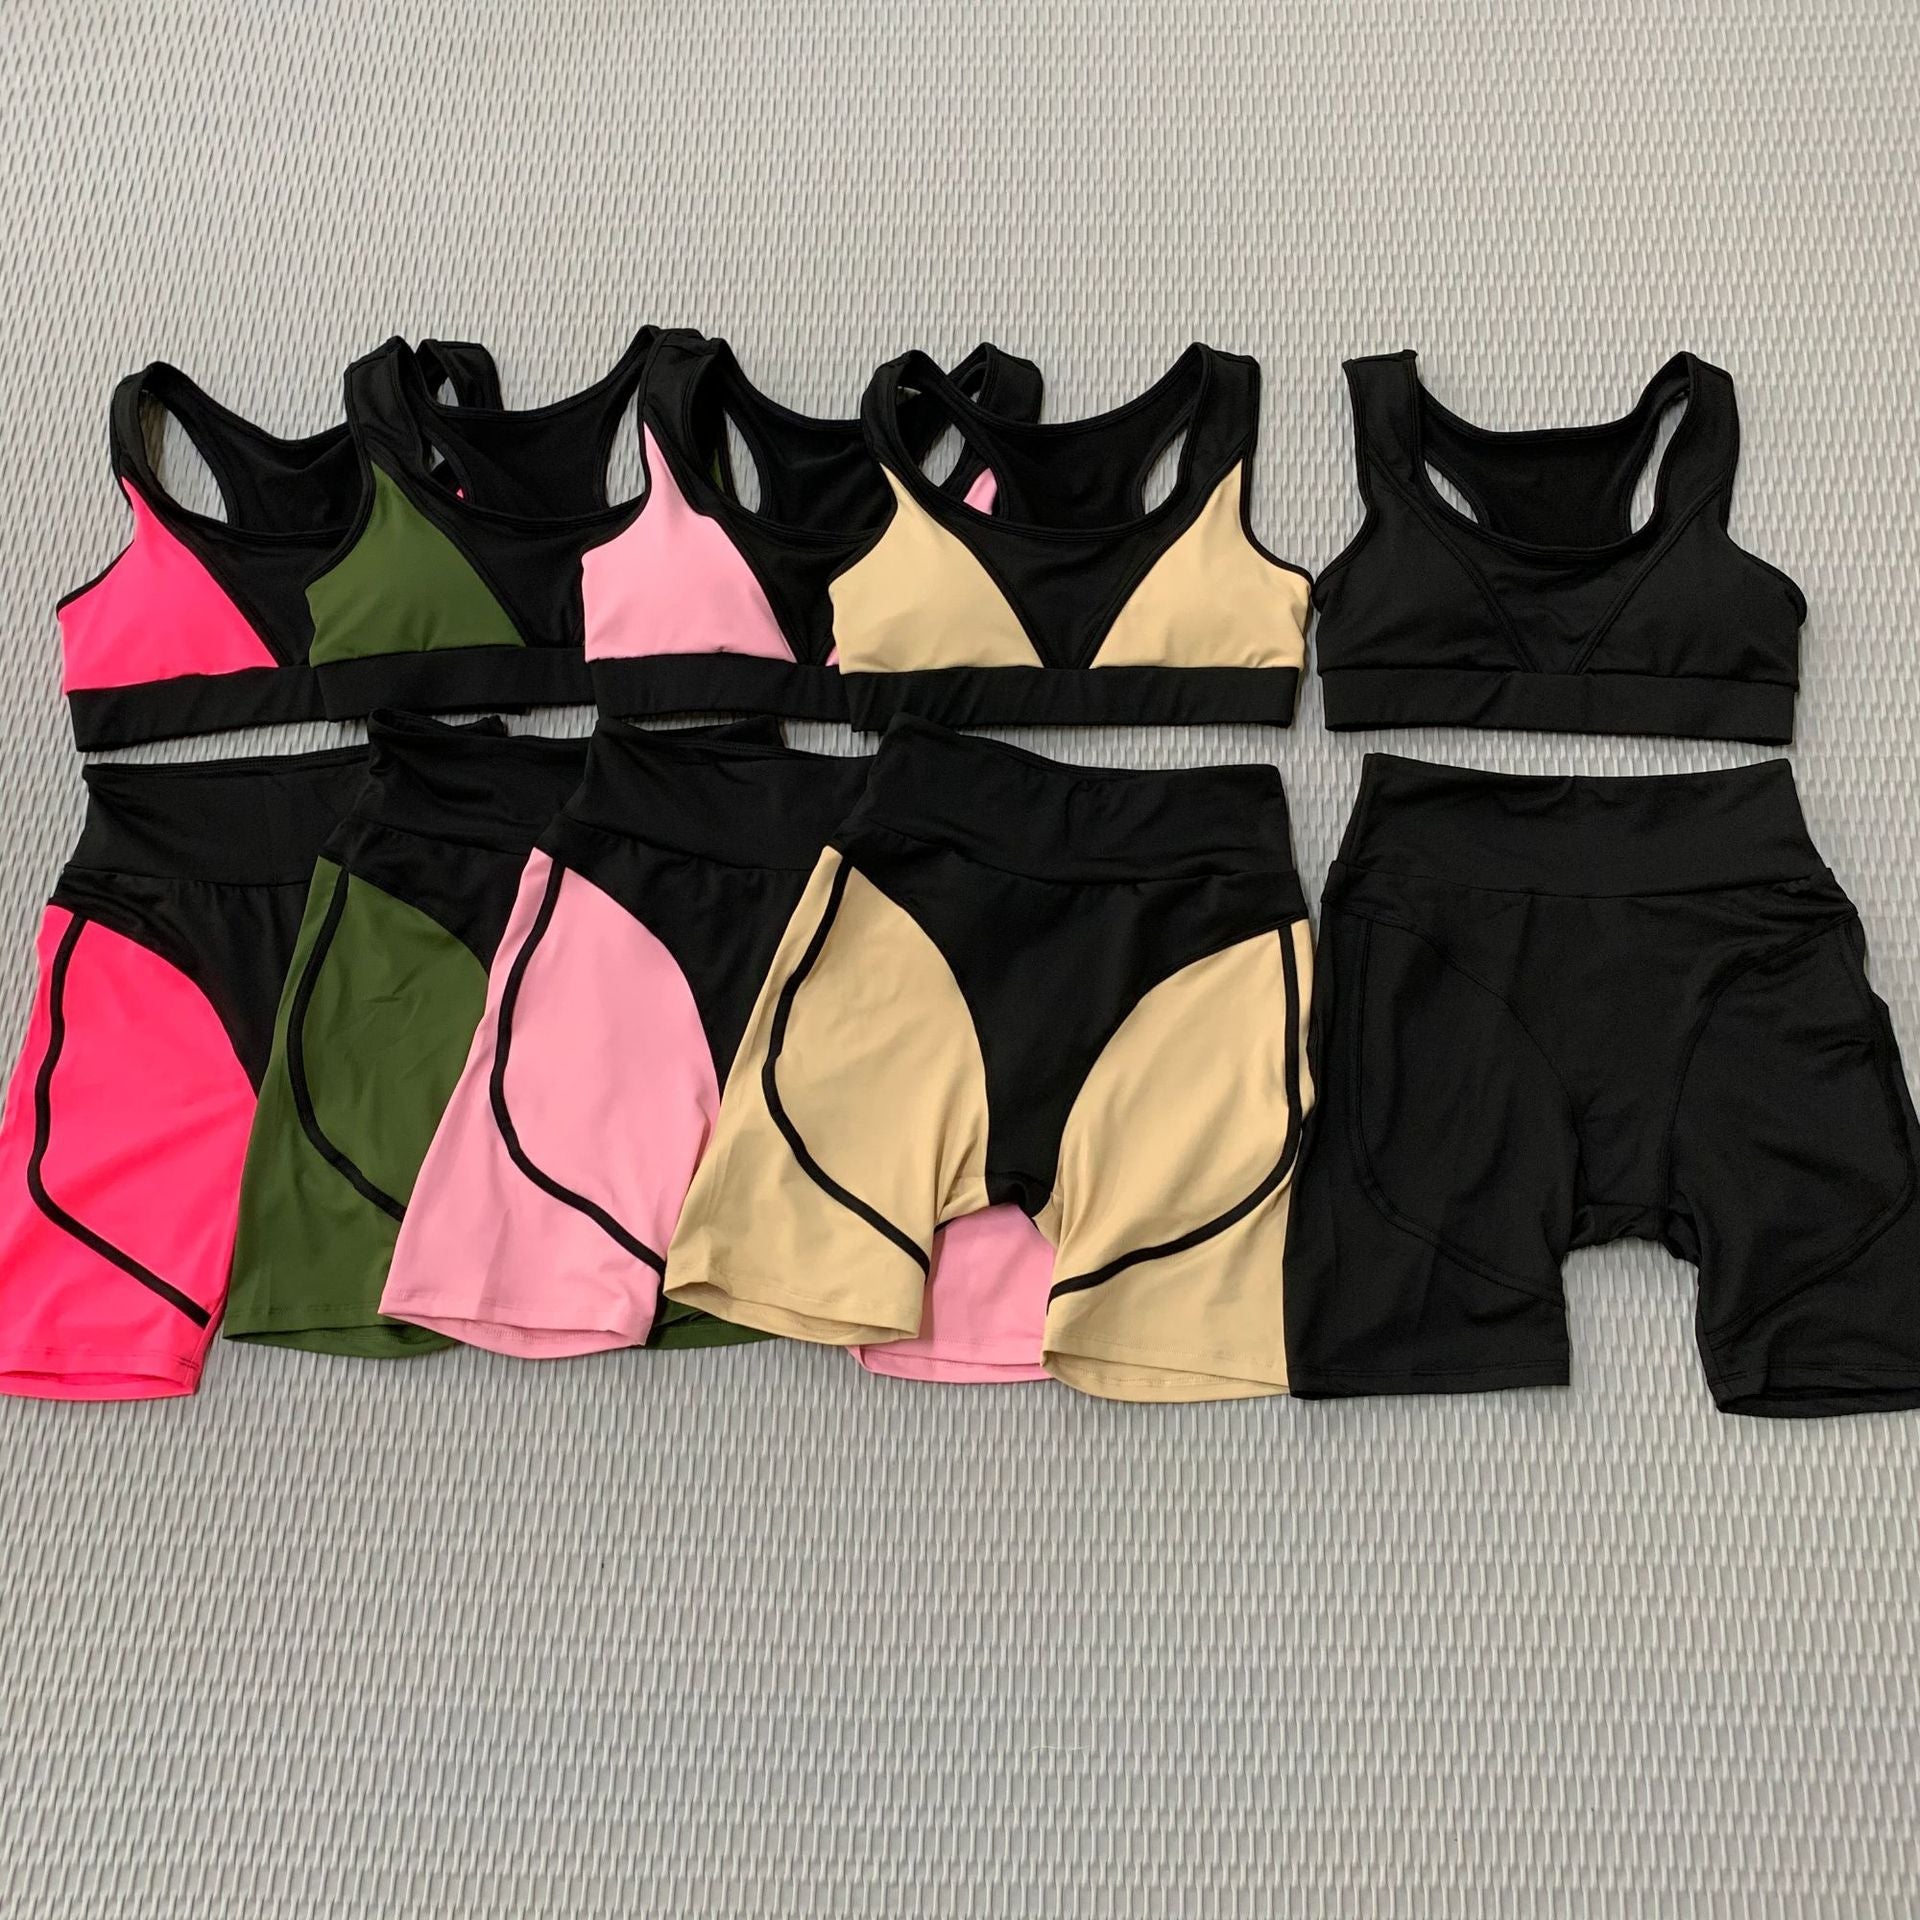 Sports Fitness Suit High Waist Tight Sexy Two Piece Active Wear Quick Drying Yoga Suit Bra Pants Workout set The Clothing Company Sydney